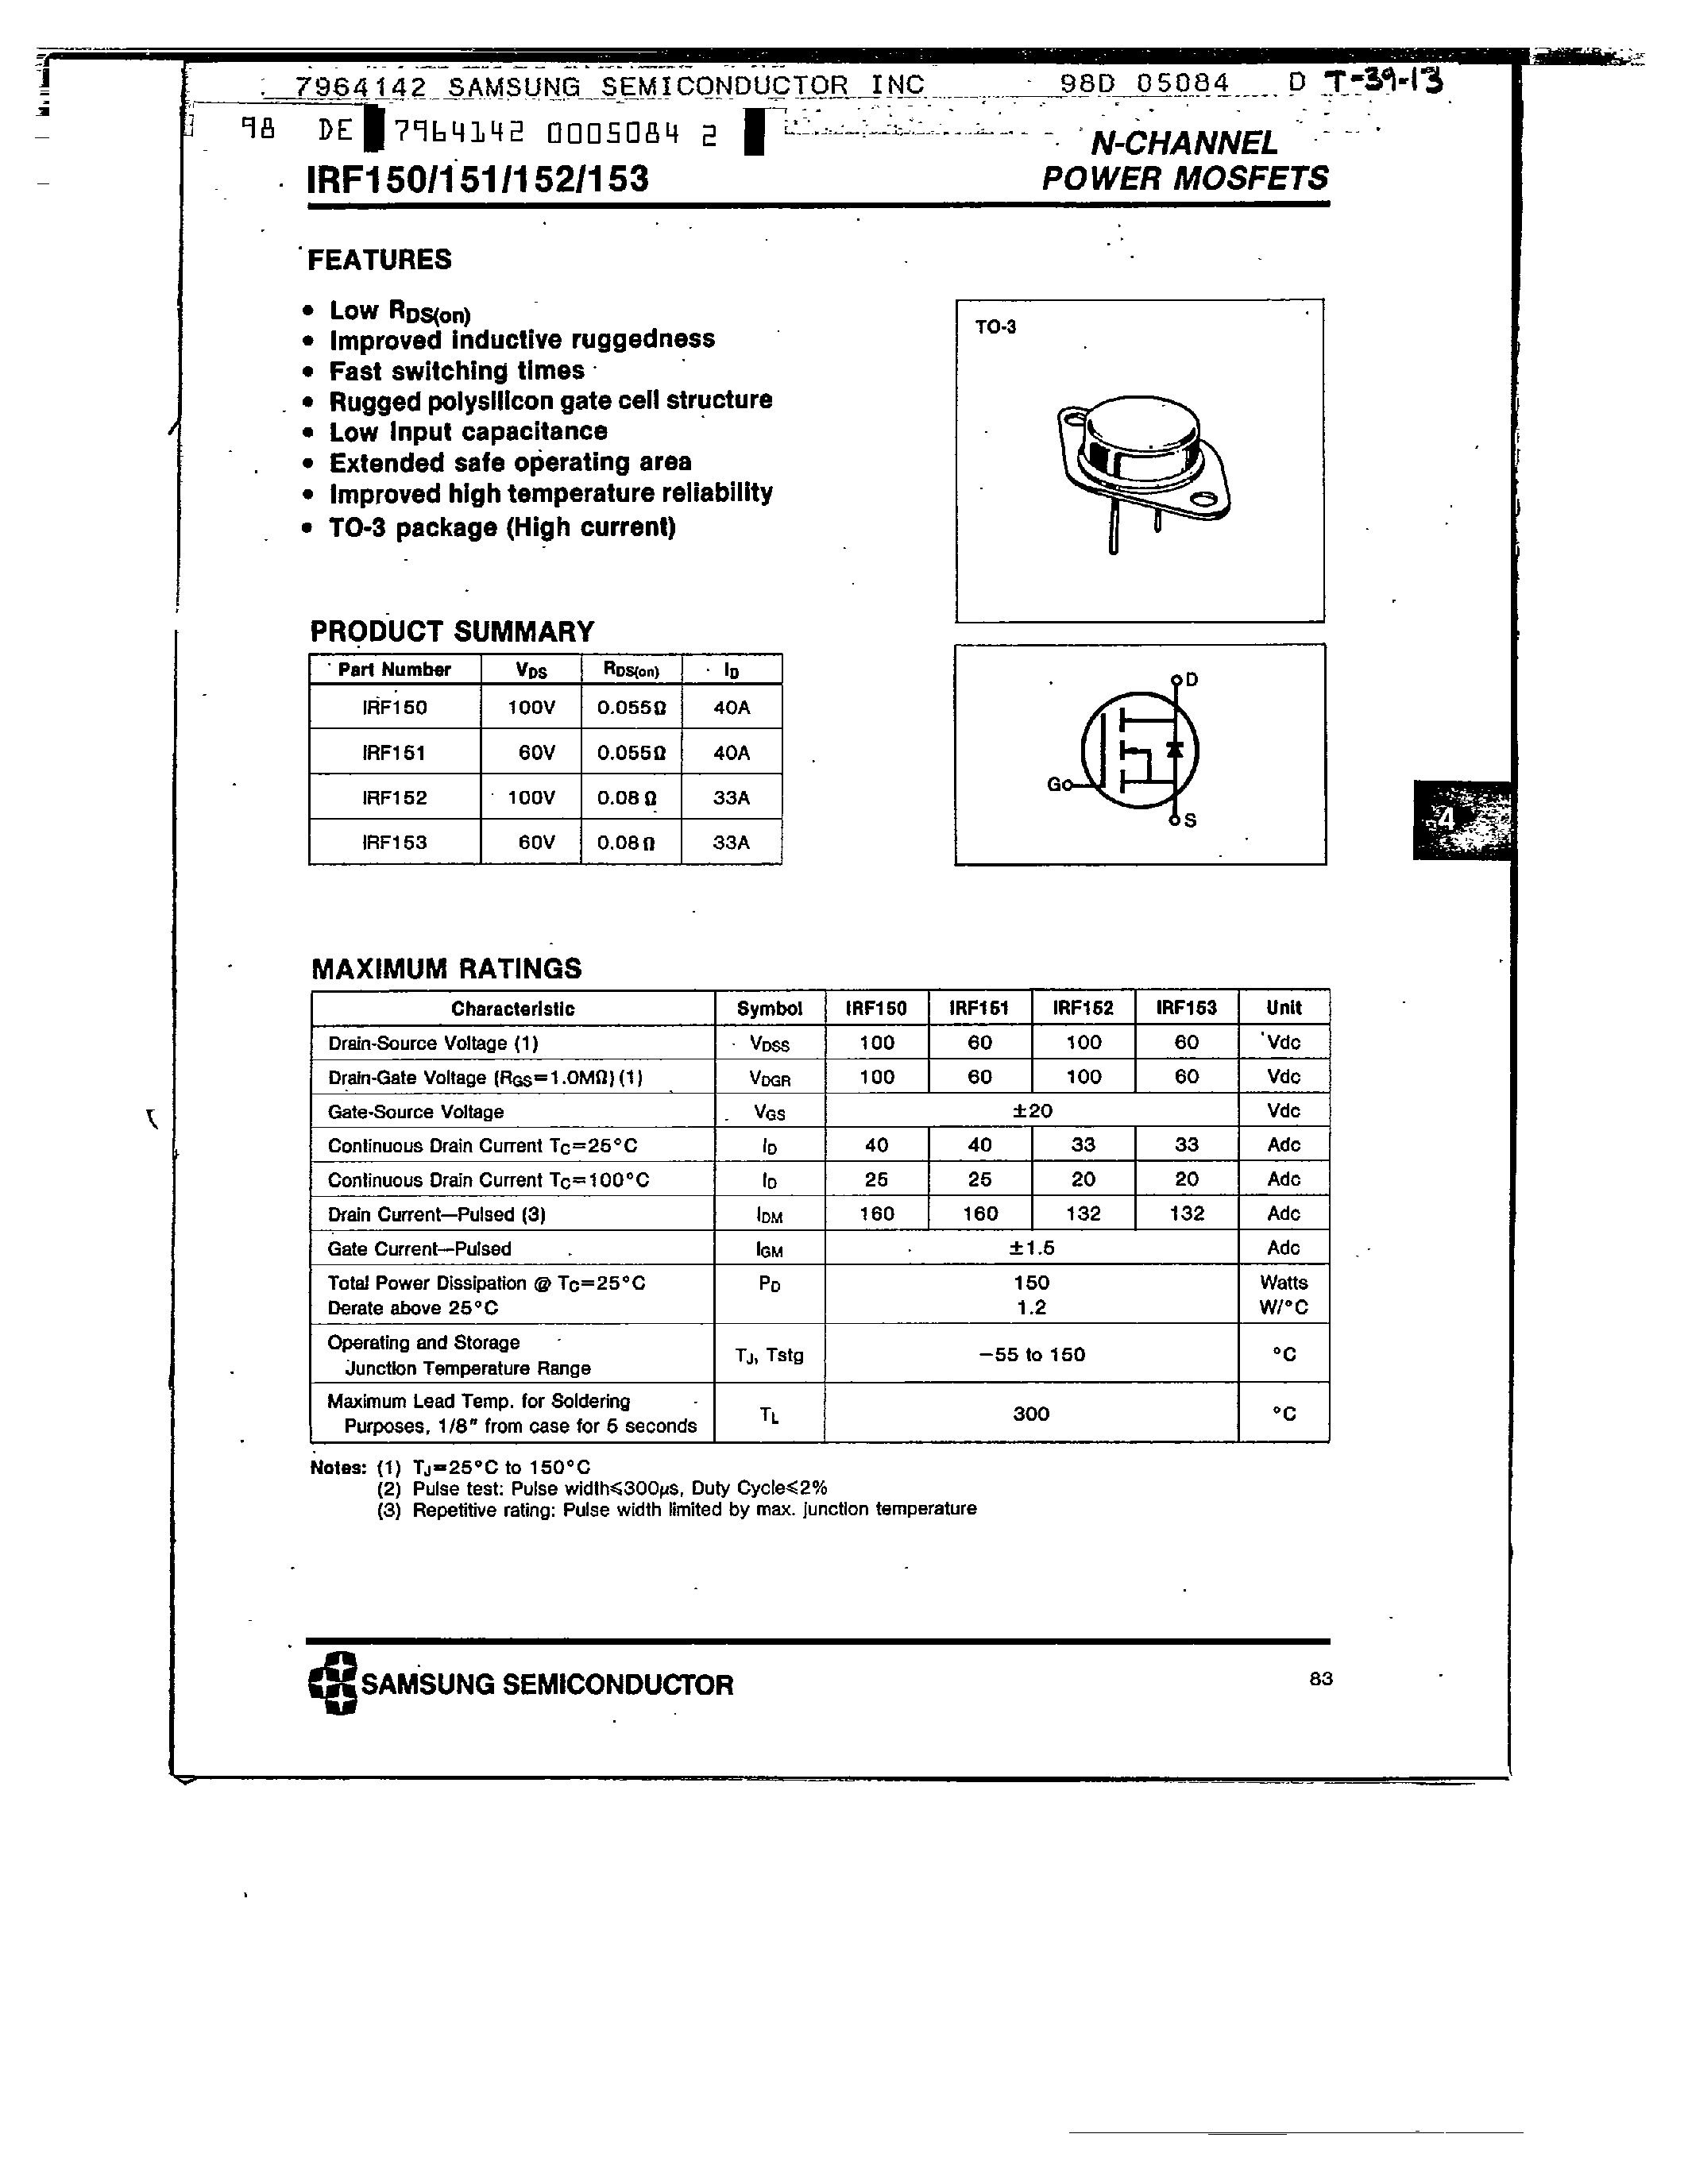 Datasheet IRF150 - N-CHANNEL POWER MOSFETS page 1